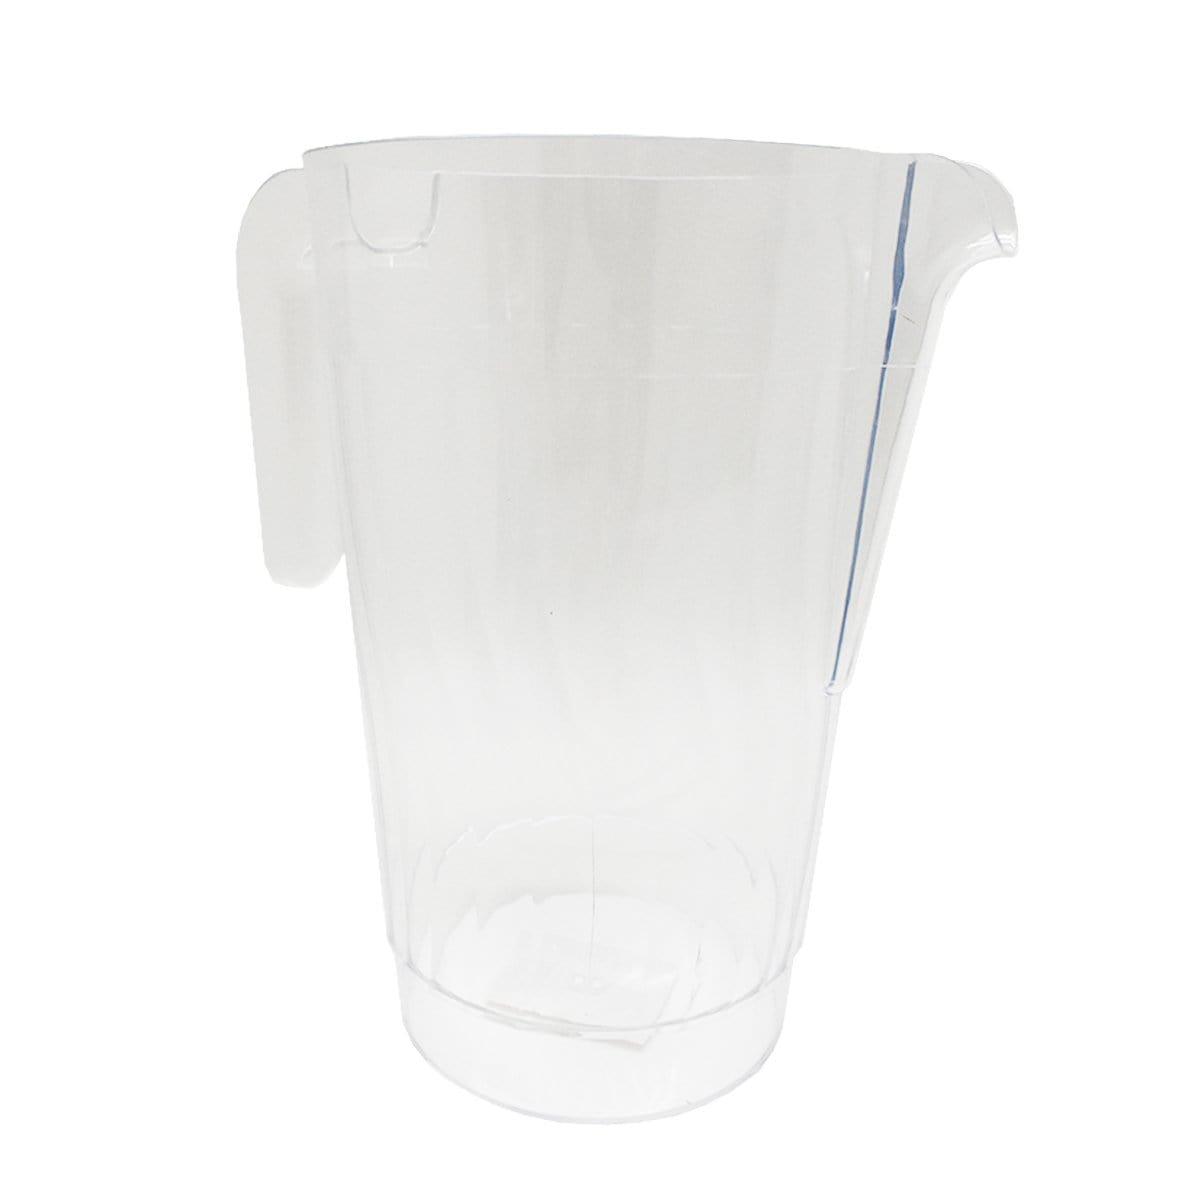 Buy Plasticware Large Plastic Pitcher - Clear sold at Party Expert